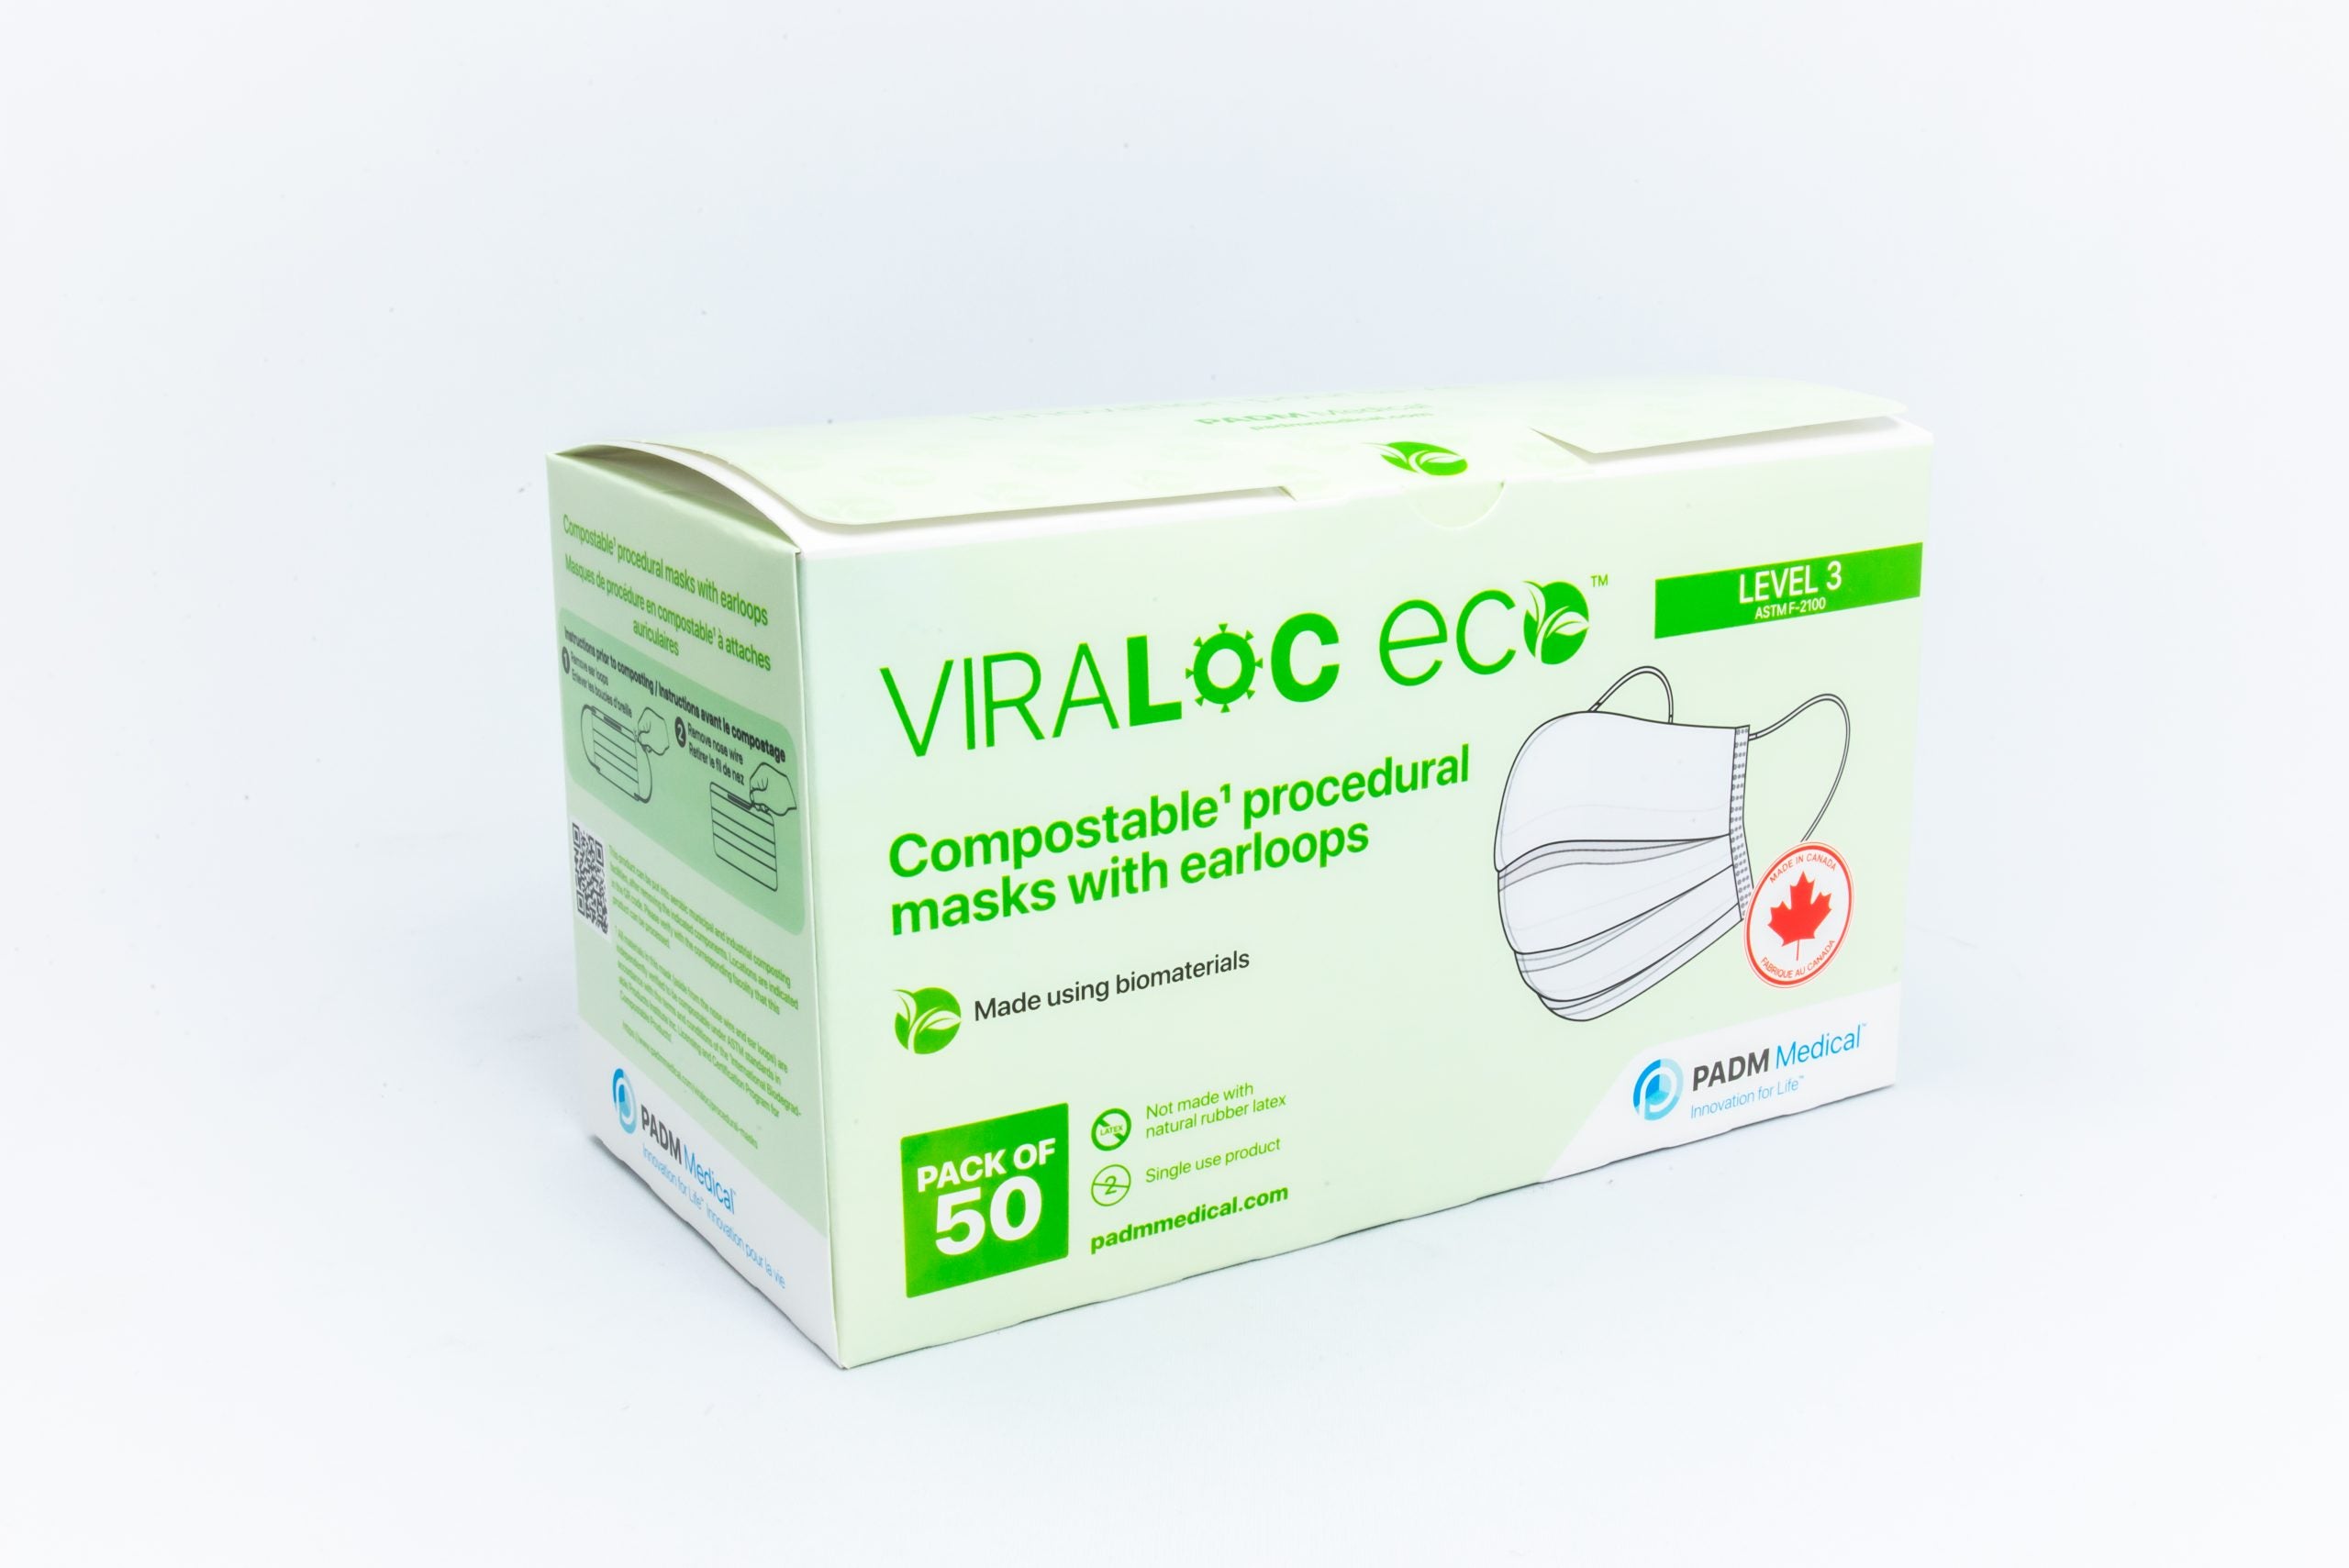 Box of 50 Viraloc Eco White Compostable Biodegradable Procedural Mask ASTM Level 3 with Earloops Made in Canada